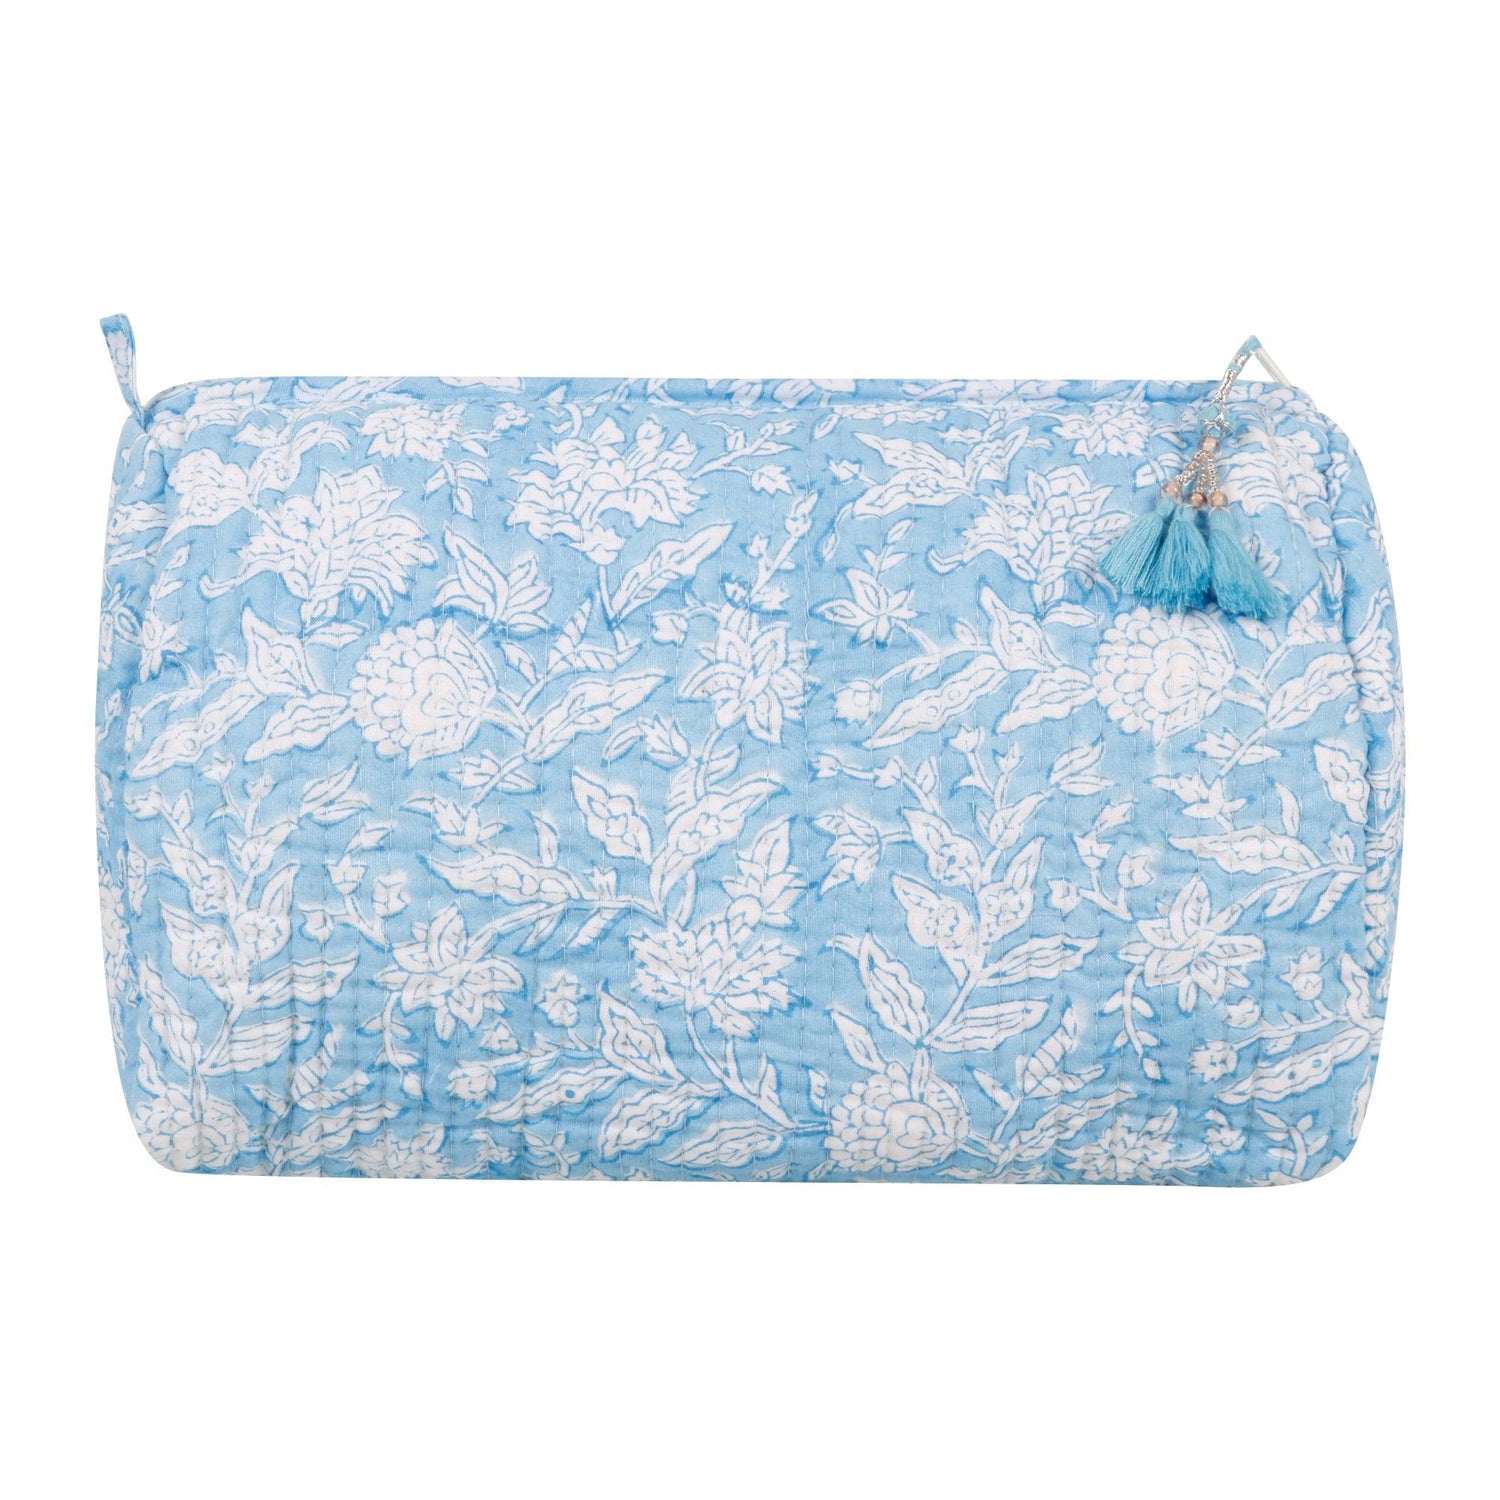 Wineberry Cosmetic Bag - Singhvis